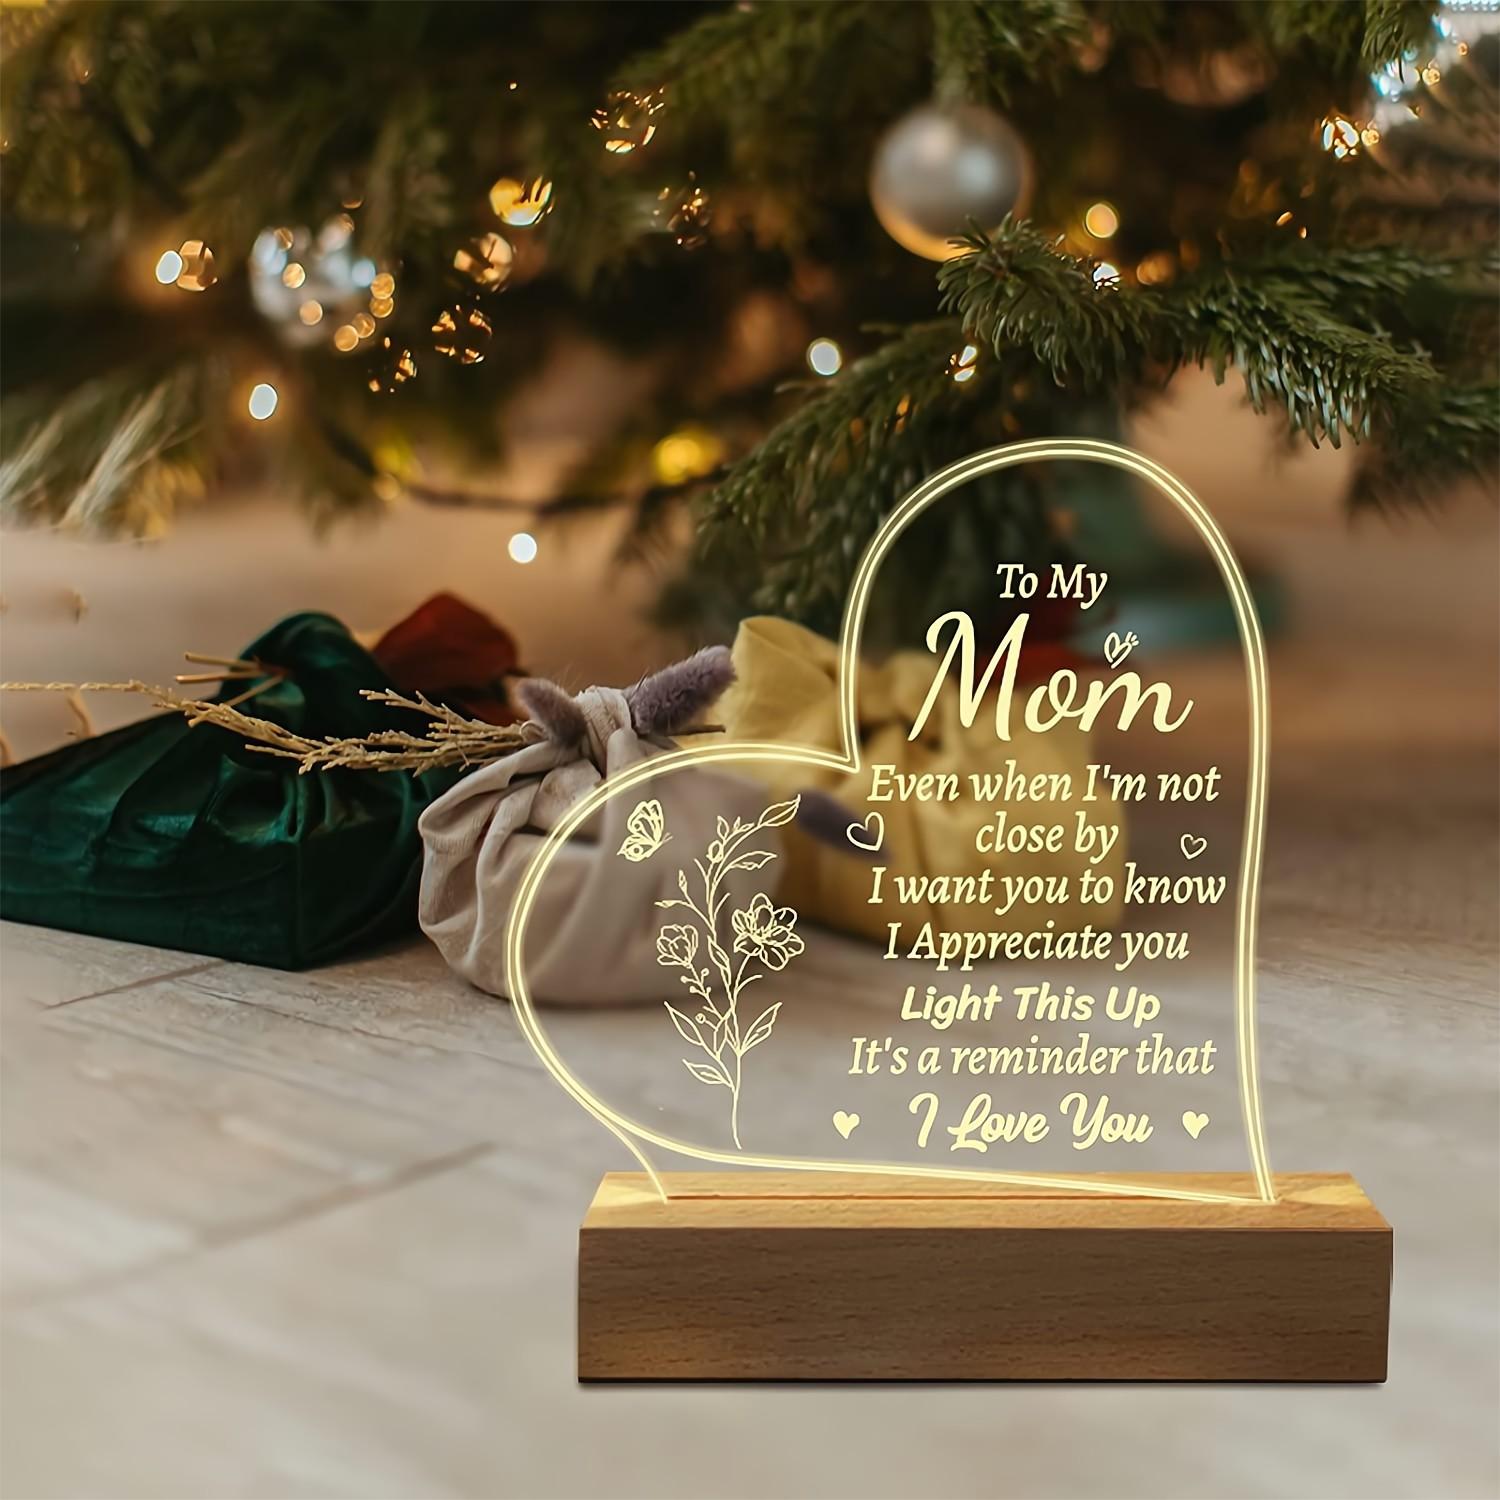 Thoughtful Christmas and Birthday Gifts for Mom - Heart-Shaped Night Light  with Warm Words - Best Mom Gift Ideas - Perfect Mom Birthday Gifts, Mothers